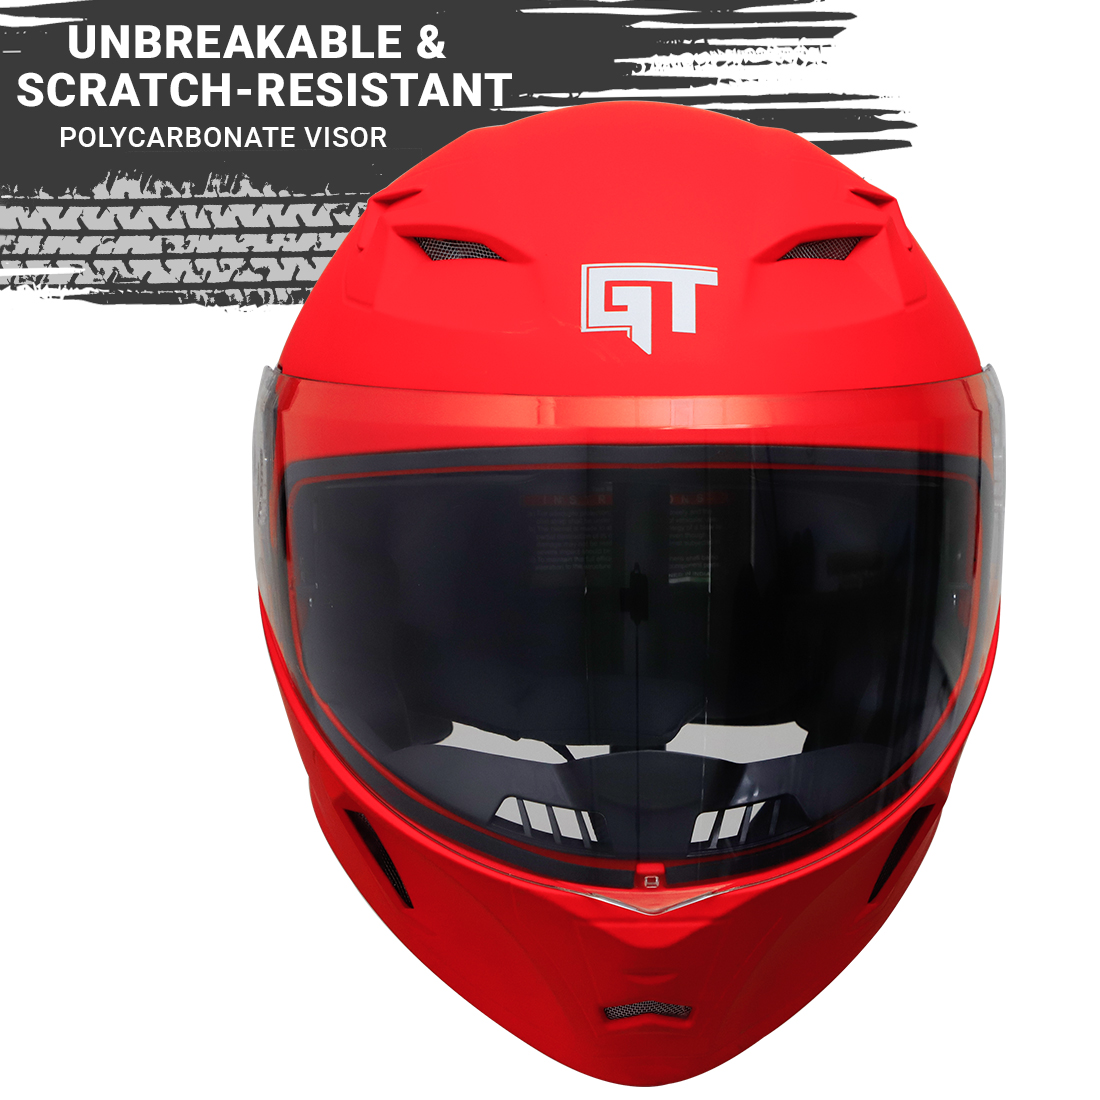 Steelbird SBA-21 GT Full Face ISI Certified Helmet (Dashing Red With Clear Visor)